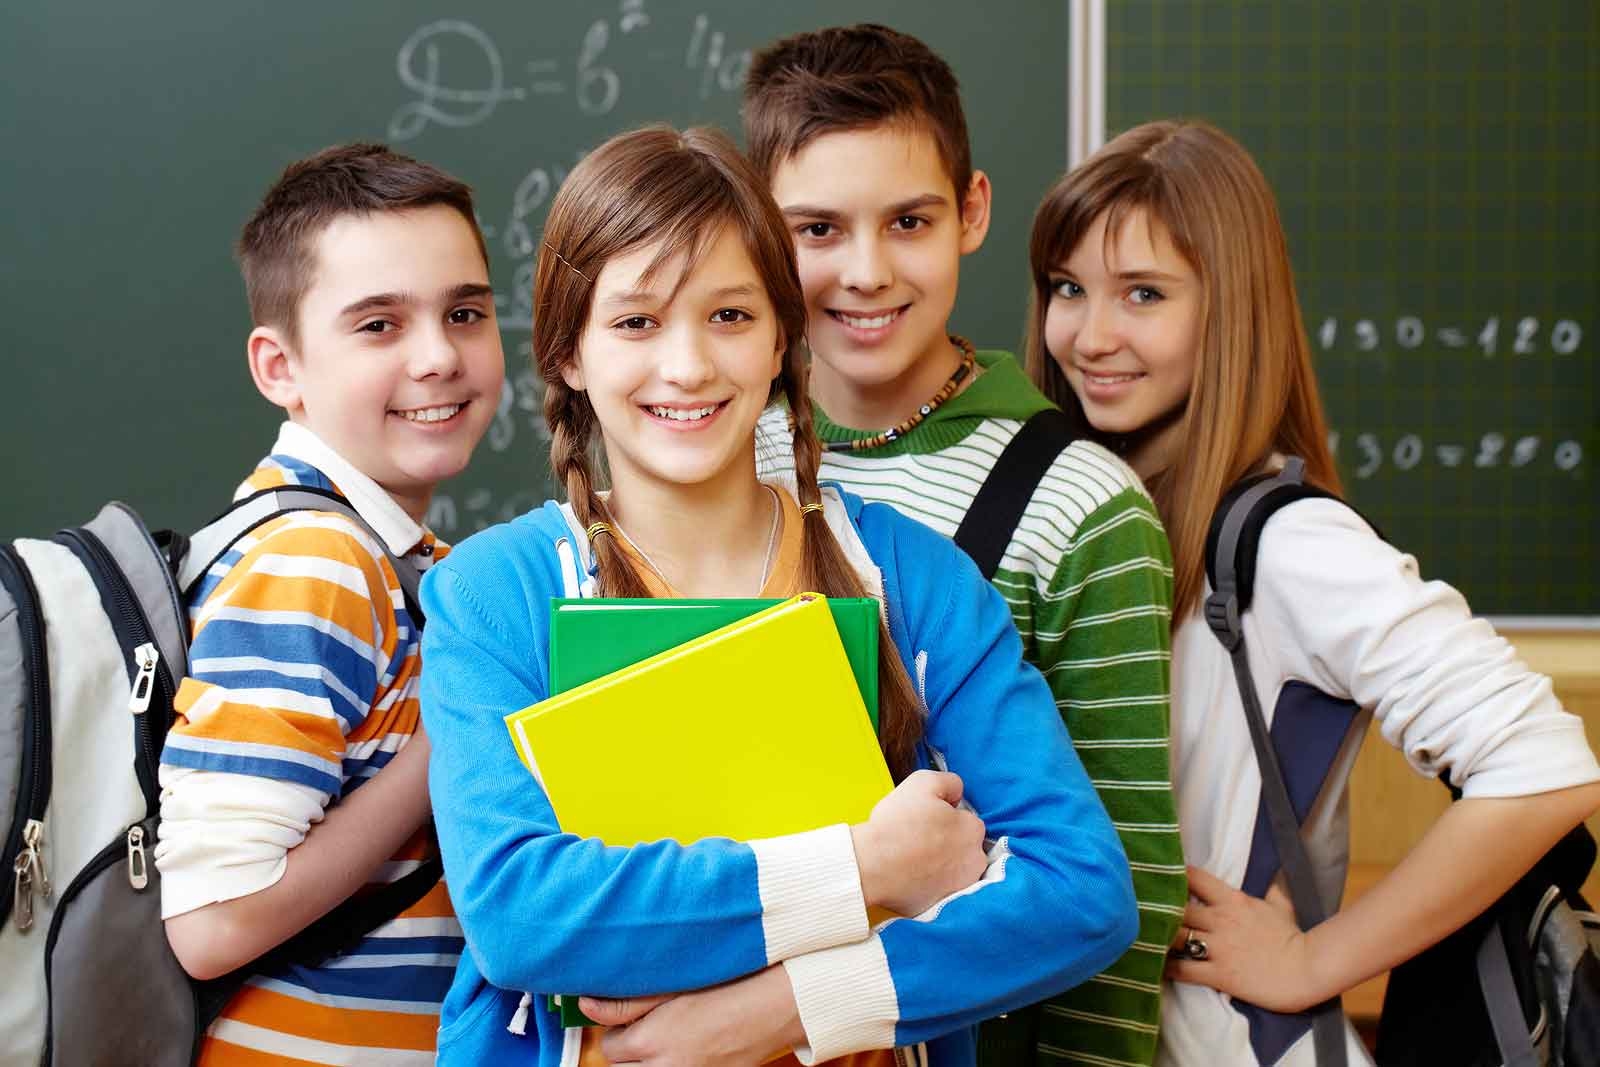 Five Common Misconceptions About Today's Students - NEPM Education Blo...